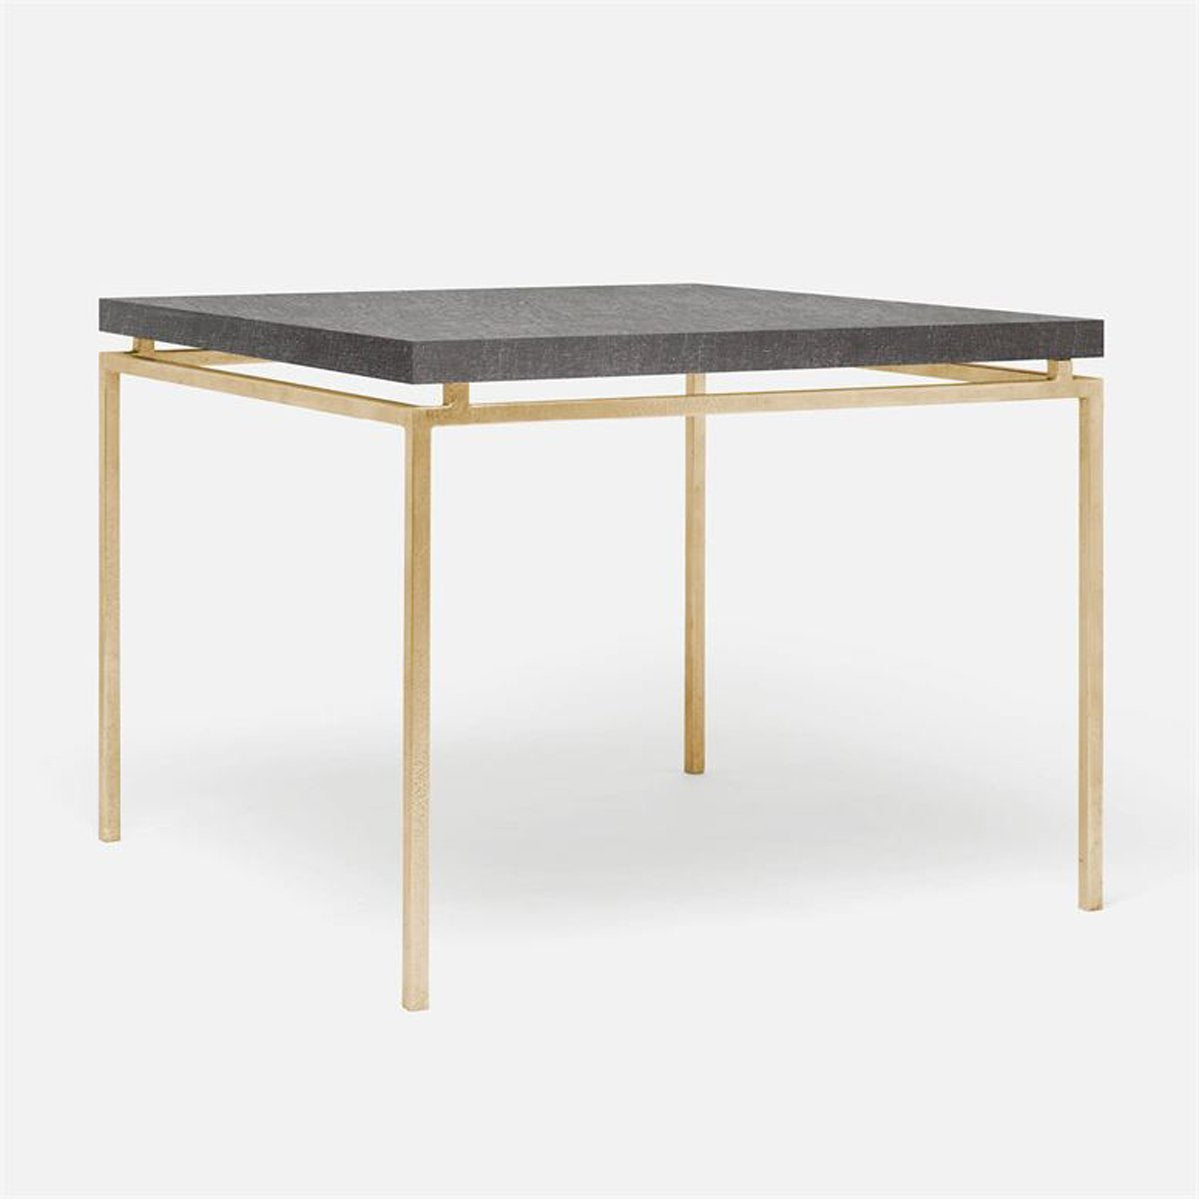 Made Goods Benjamin Floating Leg Game Table in Charcoal Faux Linen Top